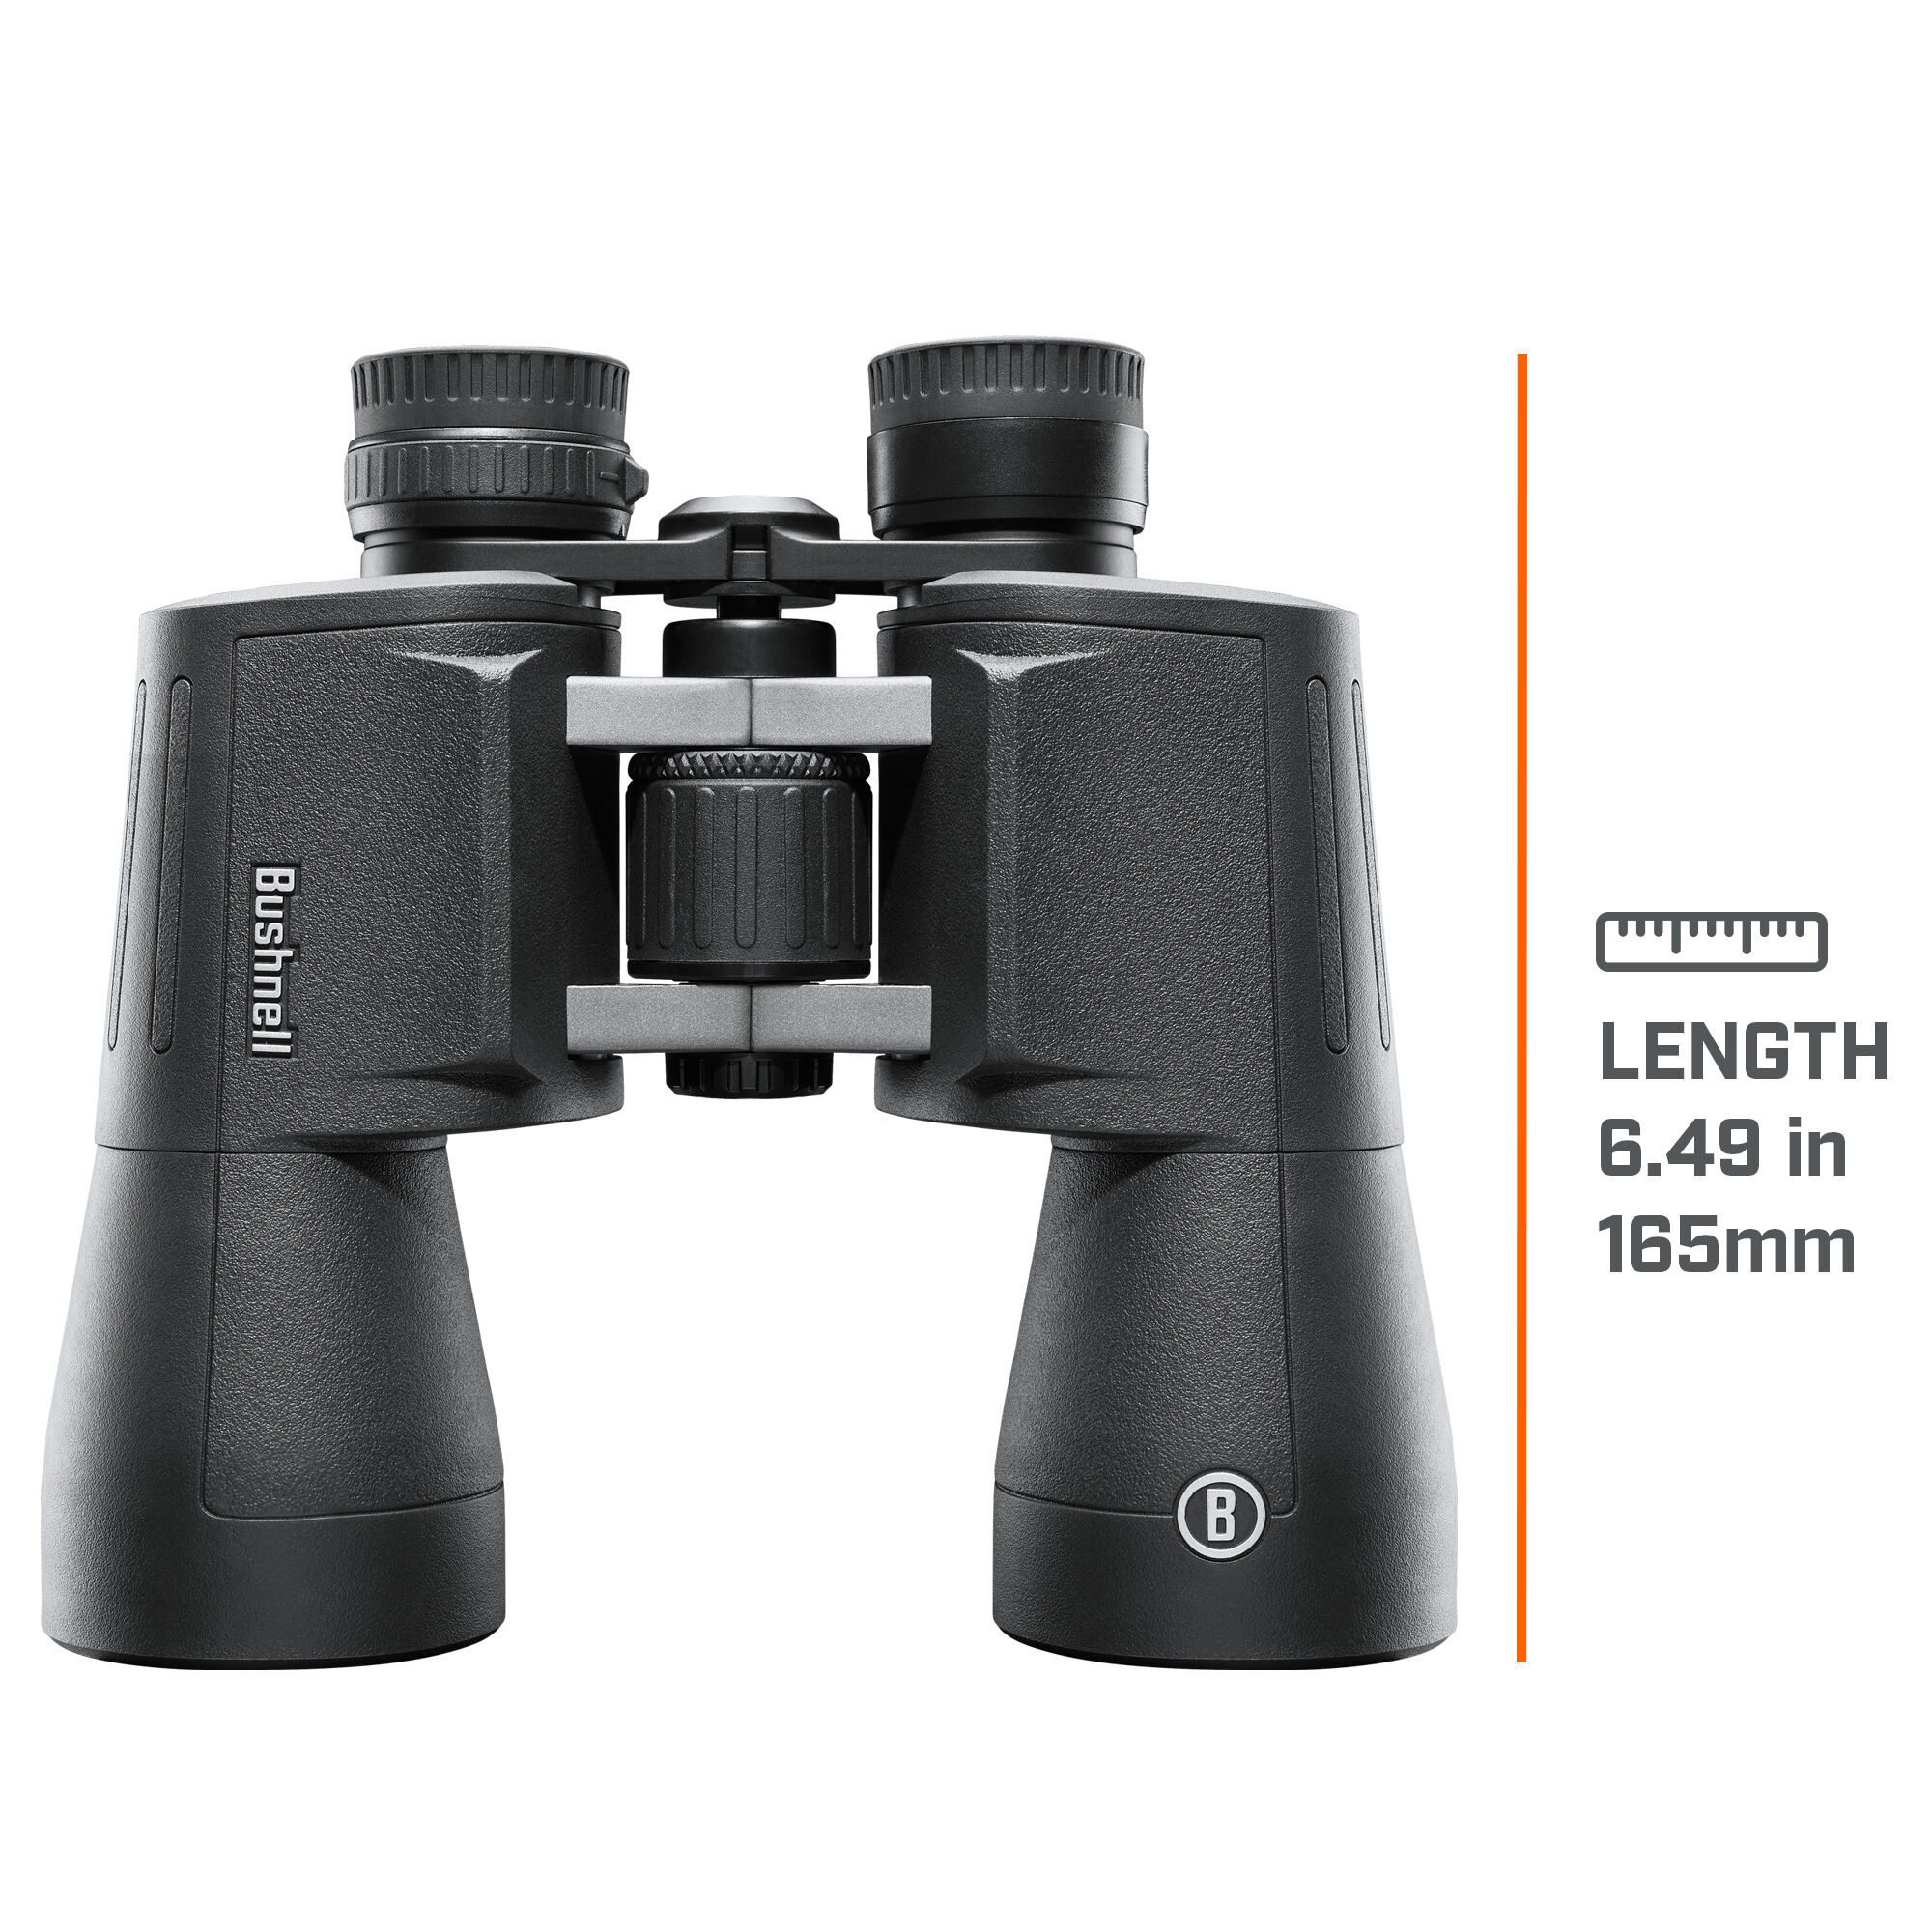 Powerview 2 Compact Binoculars, 20x50 Magnification| Bushnell